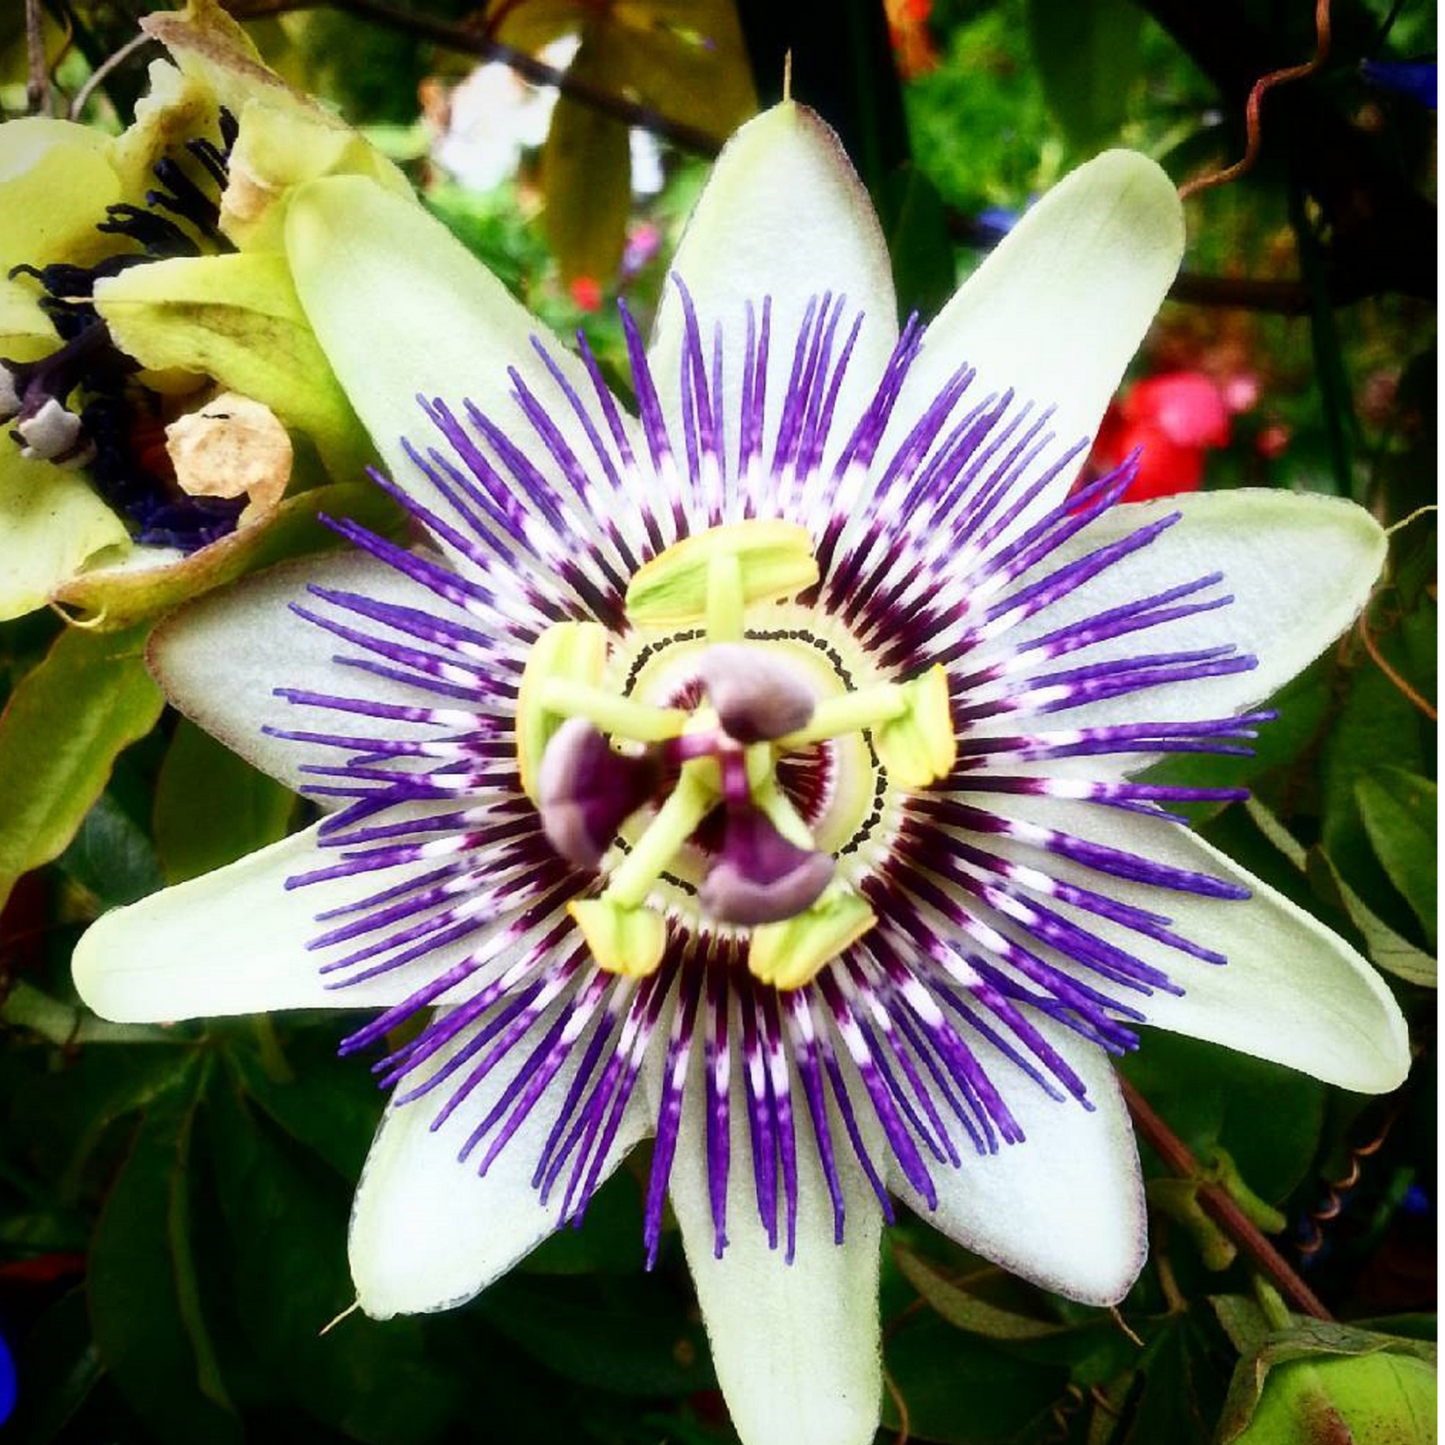 Passion Flower Herb, Dried Herbs, Food Grade Herbs, Herbs and Spices, Loose Leaf Herbs